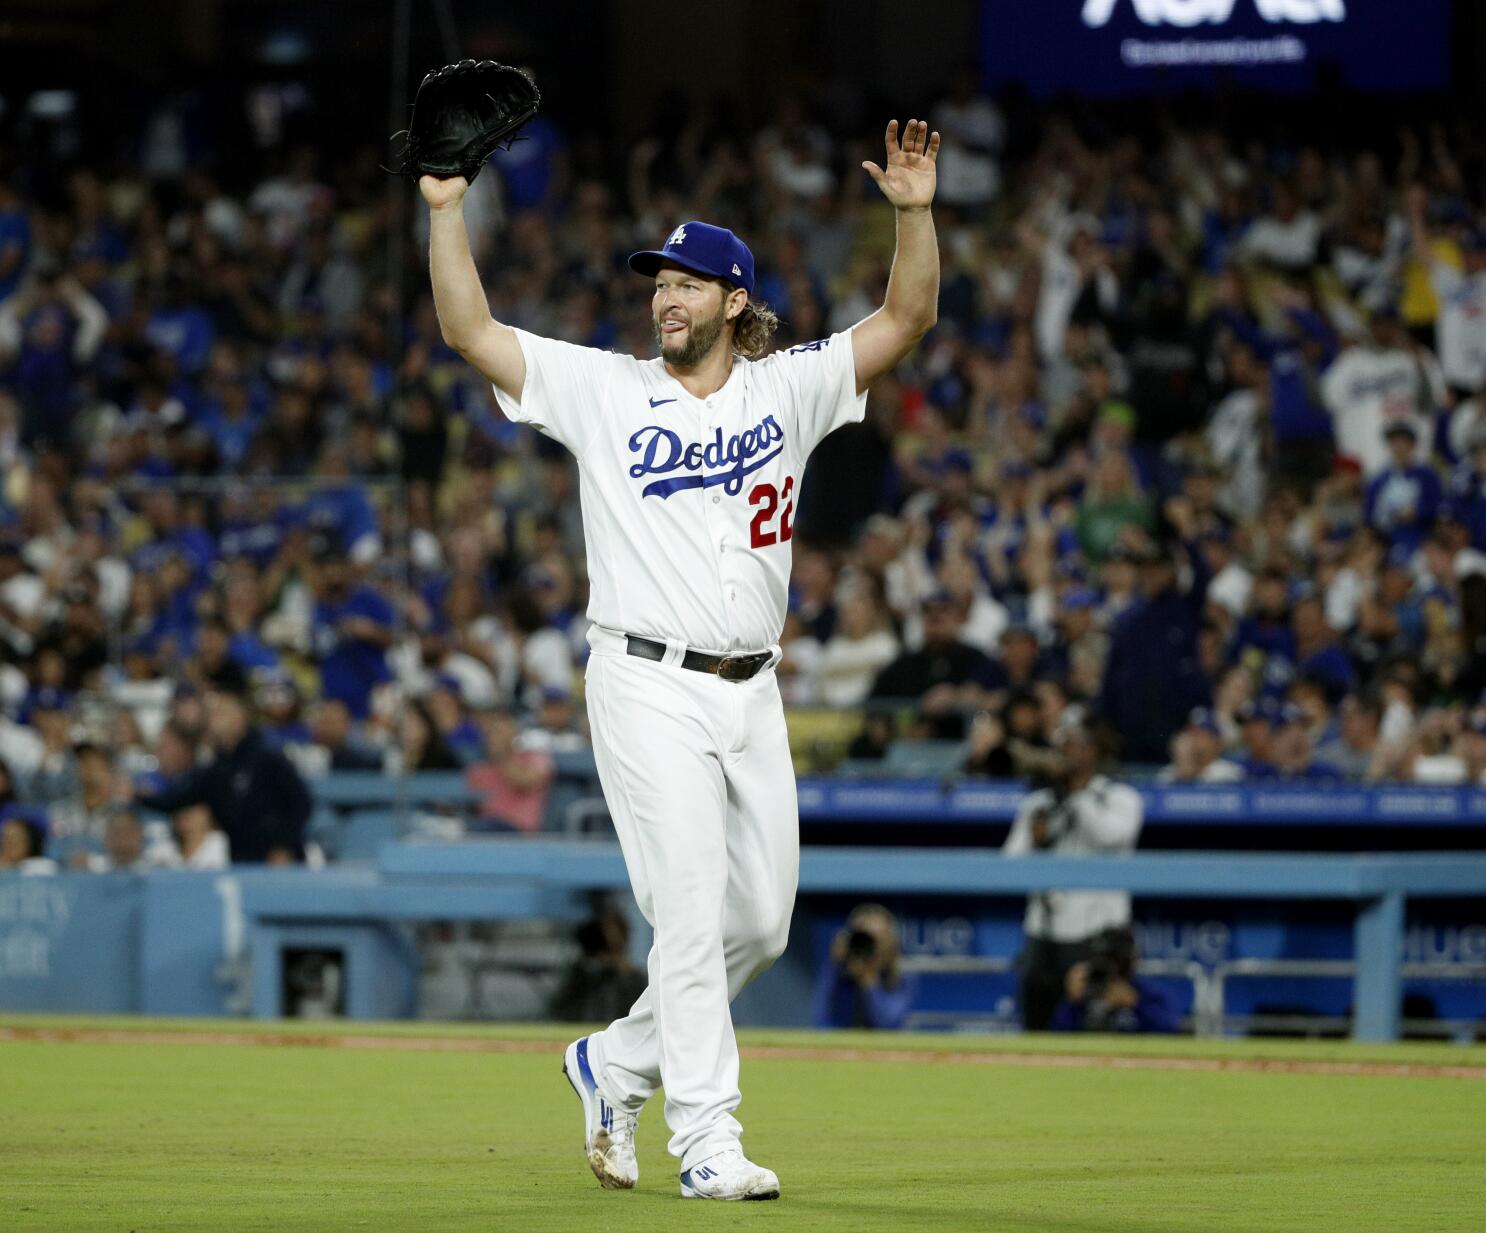 The Dodgers' 2023 season has been special, even if they don't make